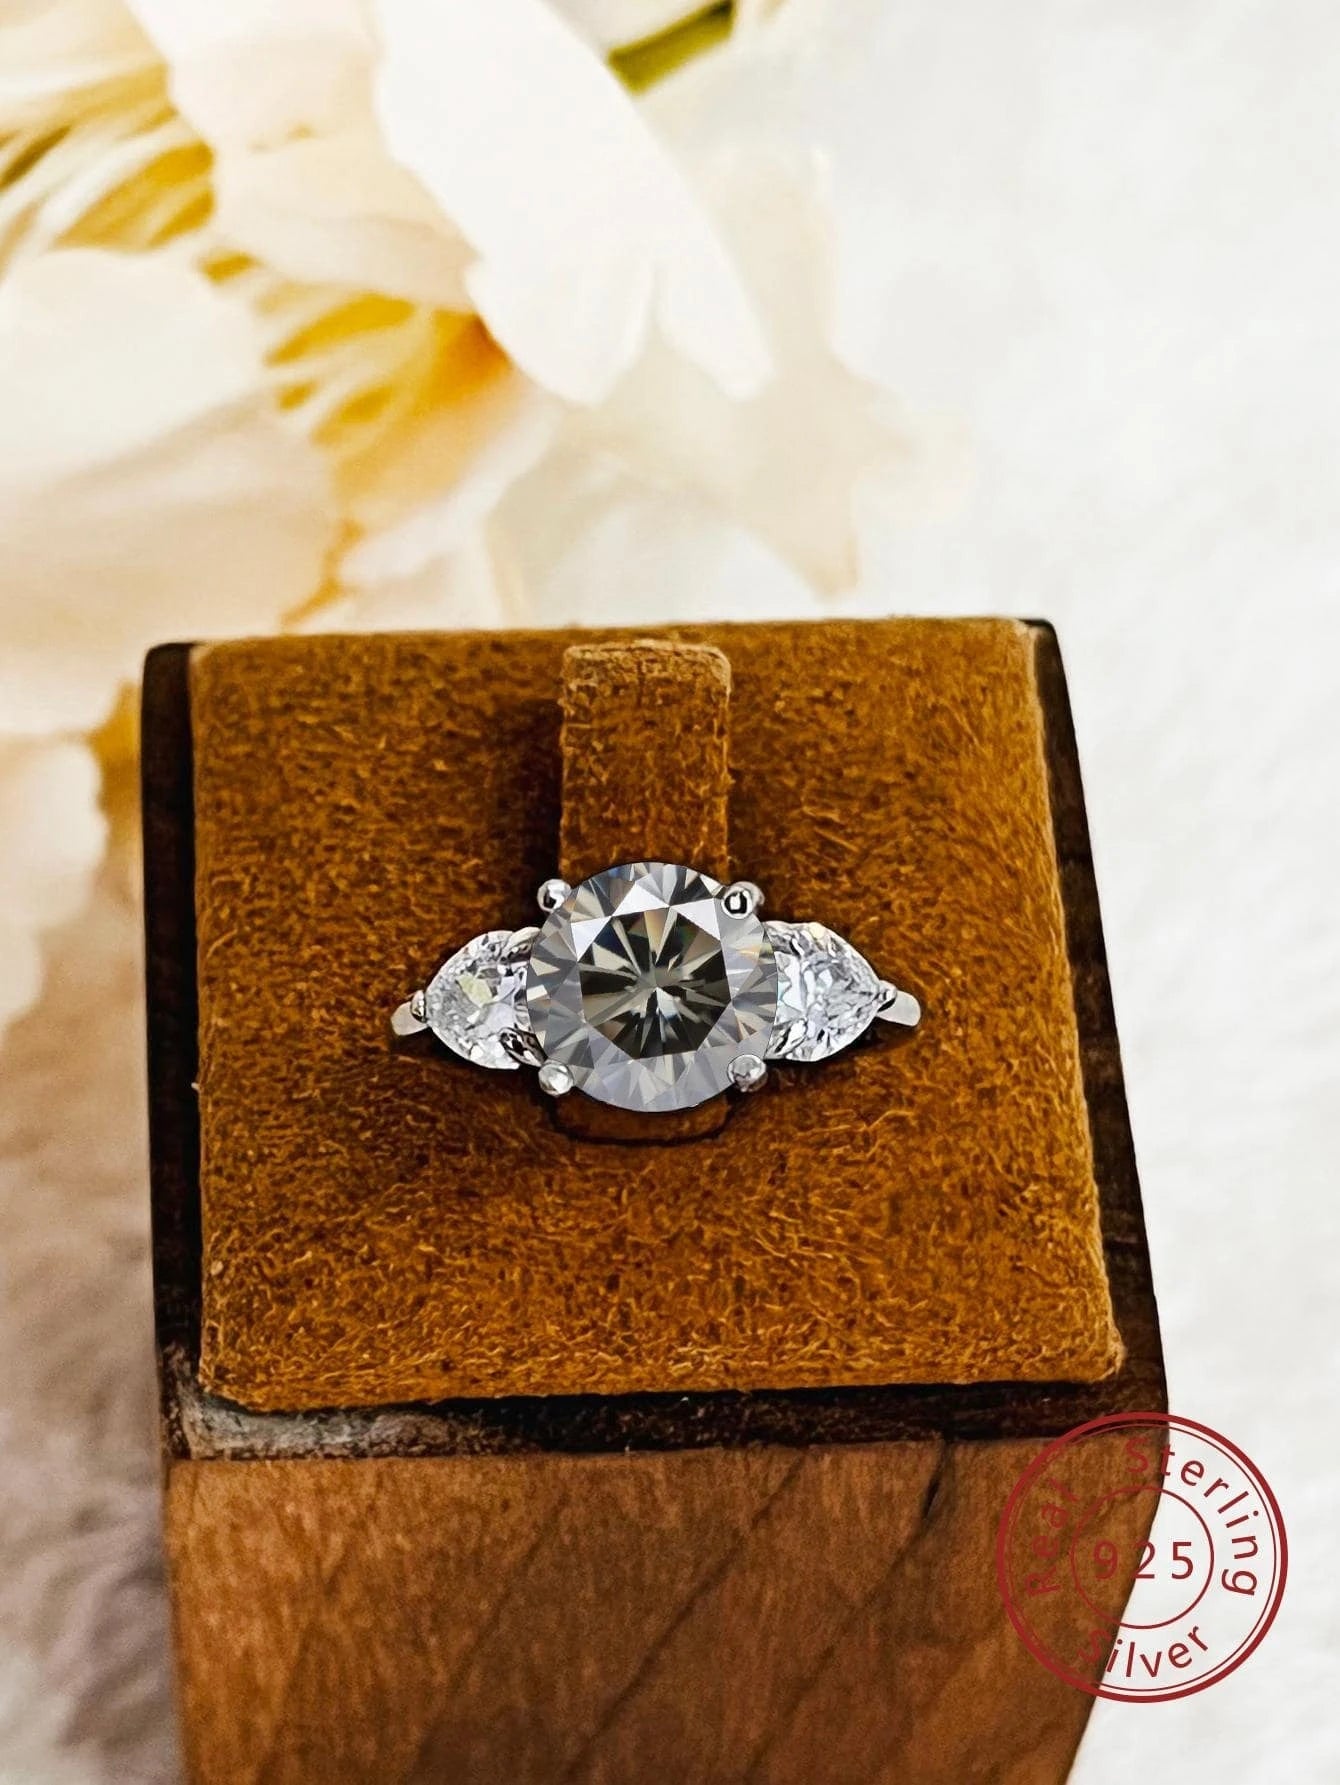 Elegant Silver Ring with Laboratory-Created Moissanite Decoration for Women - Perfect as an Engagement Gift.